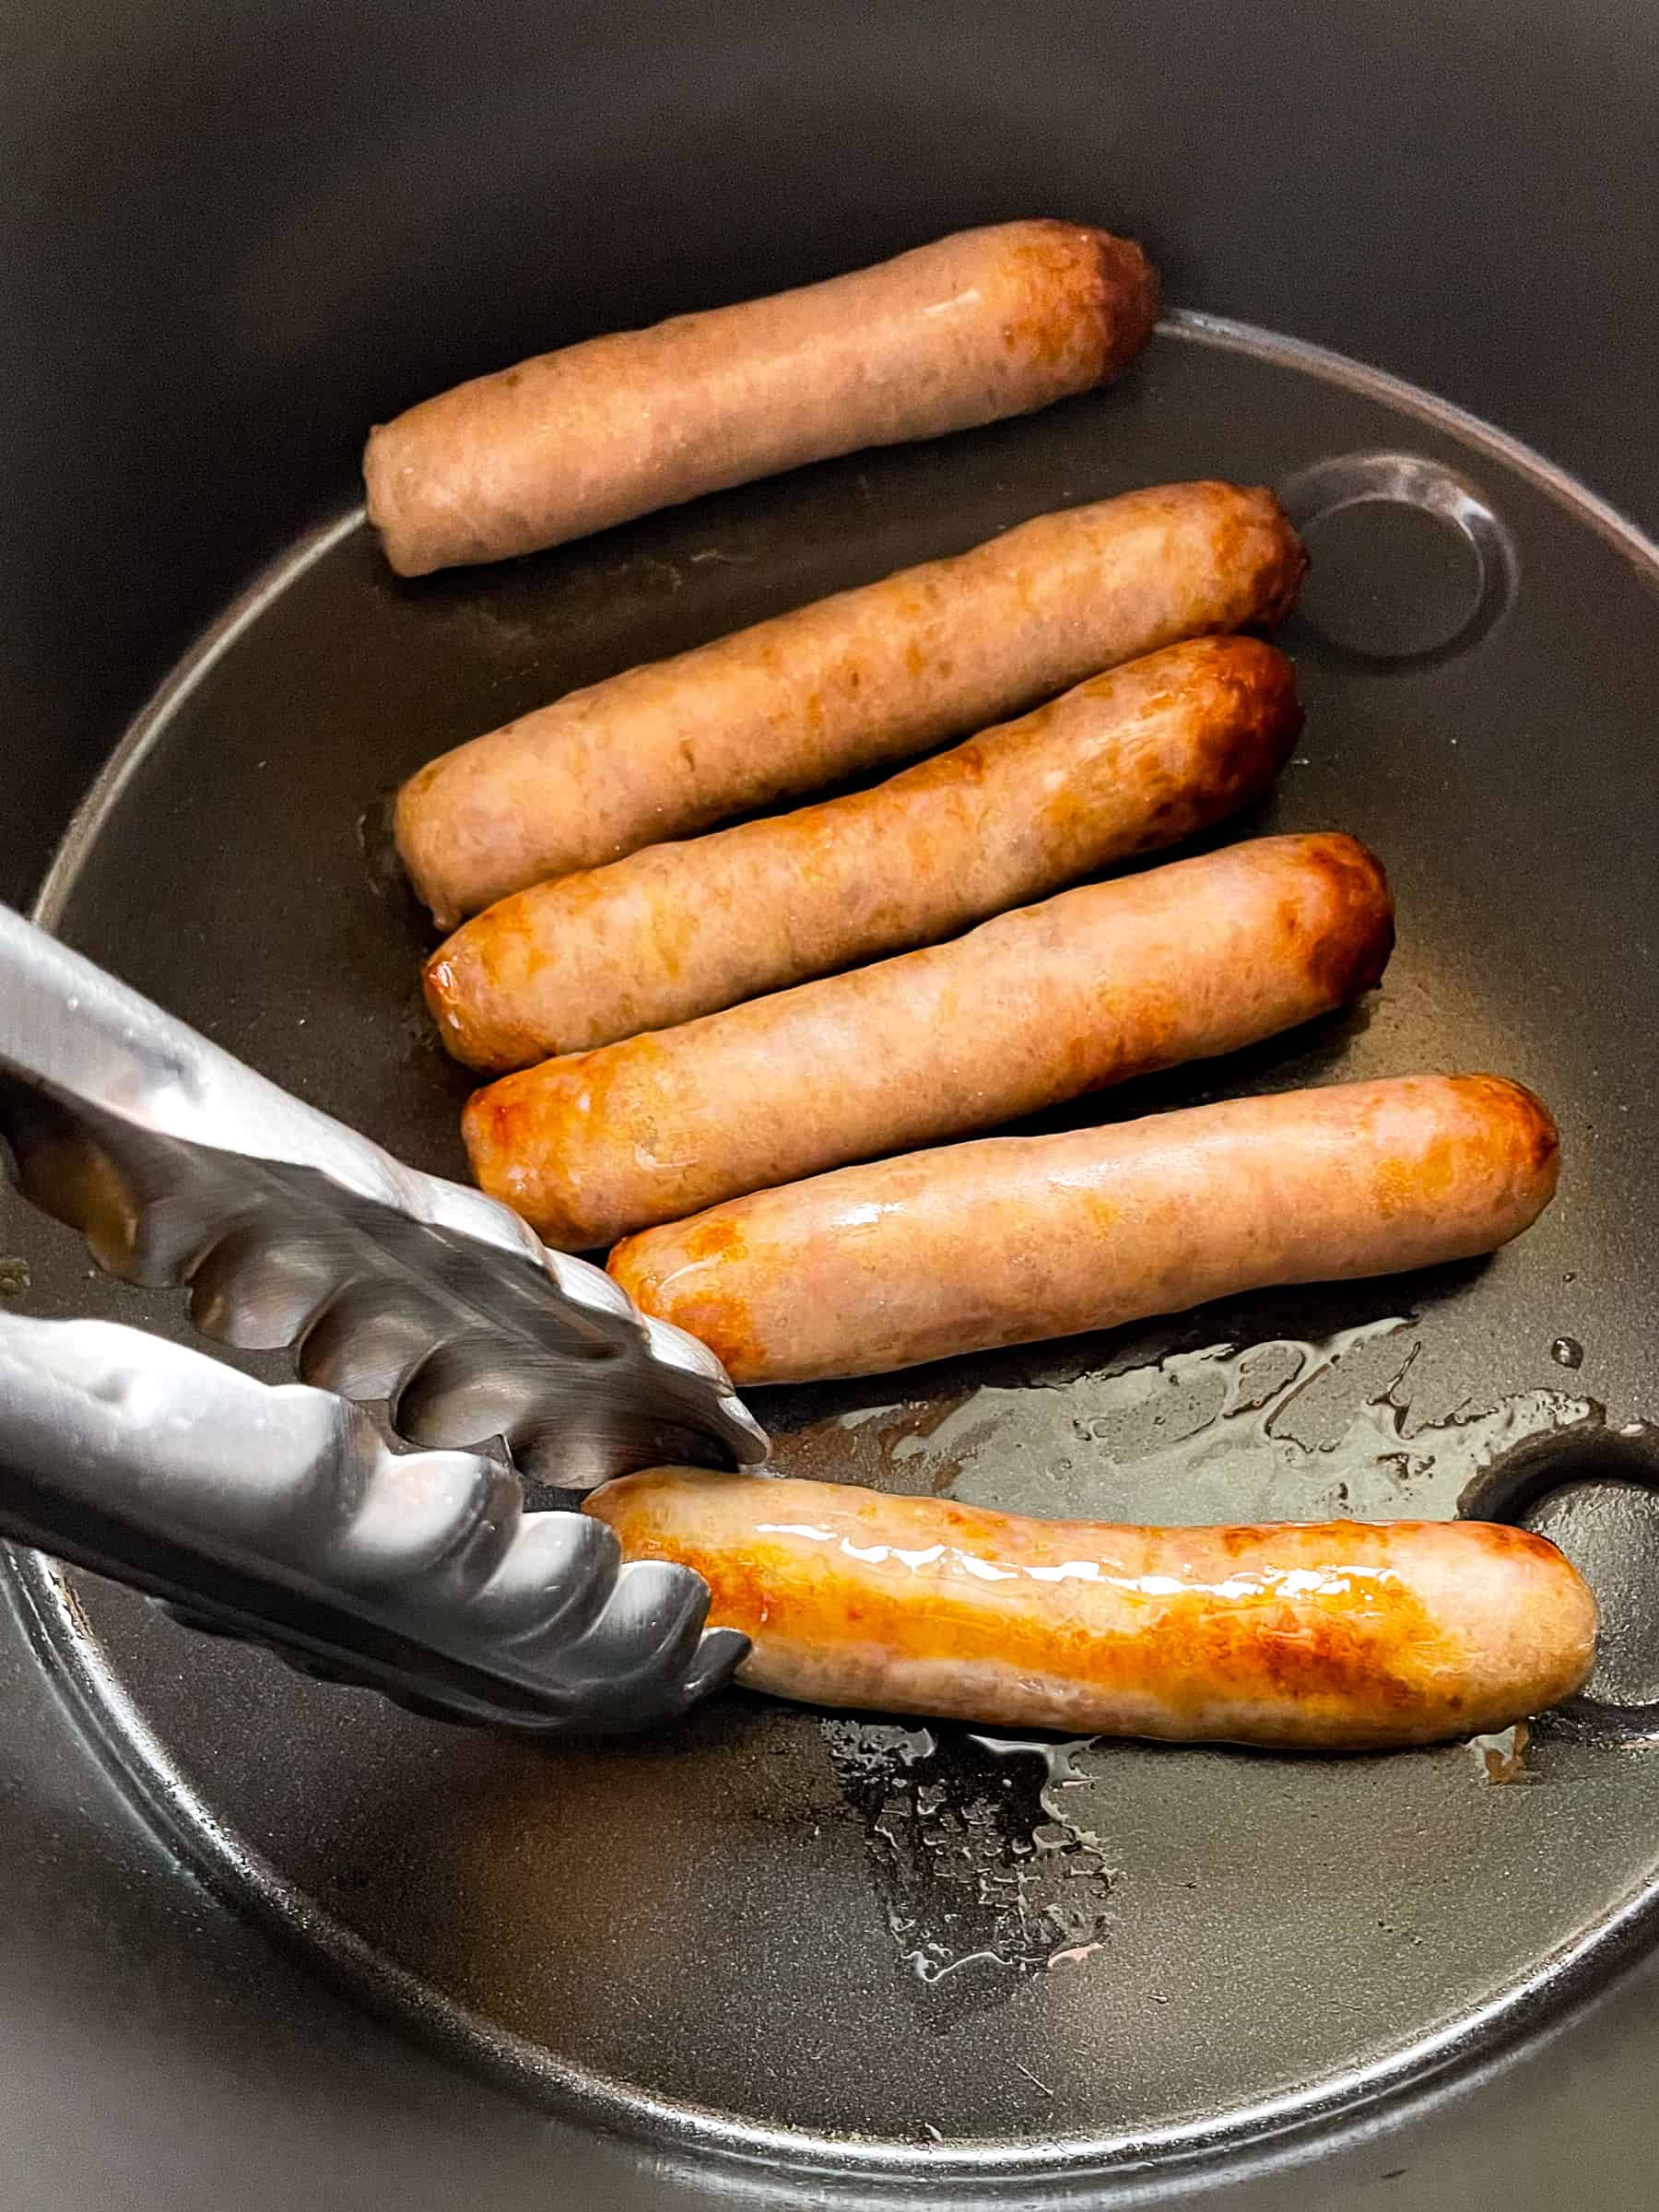 Turning breakfast sausage links in the air fryer with a pair of tongs.